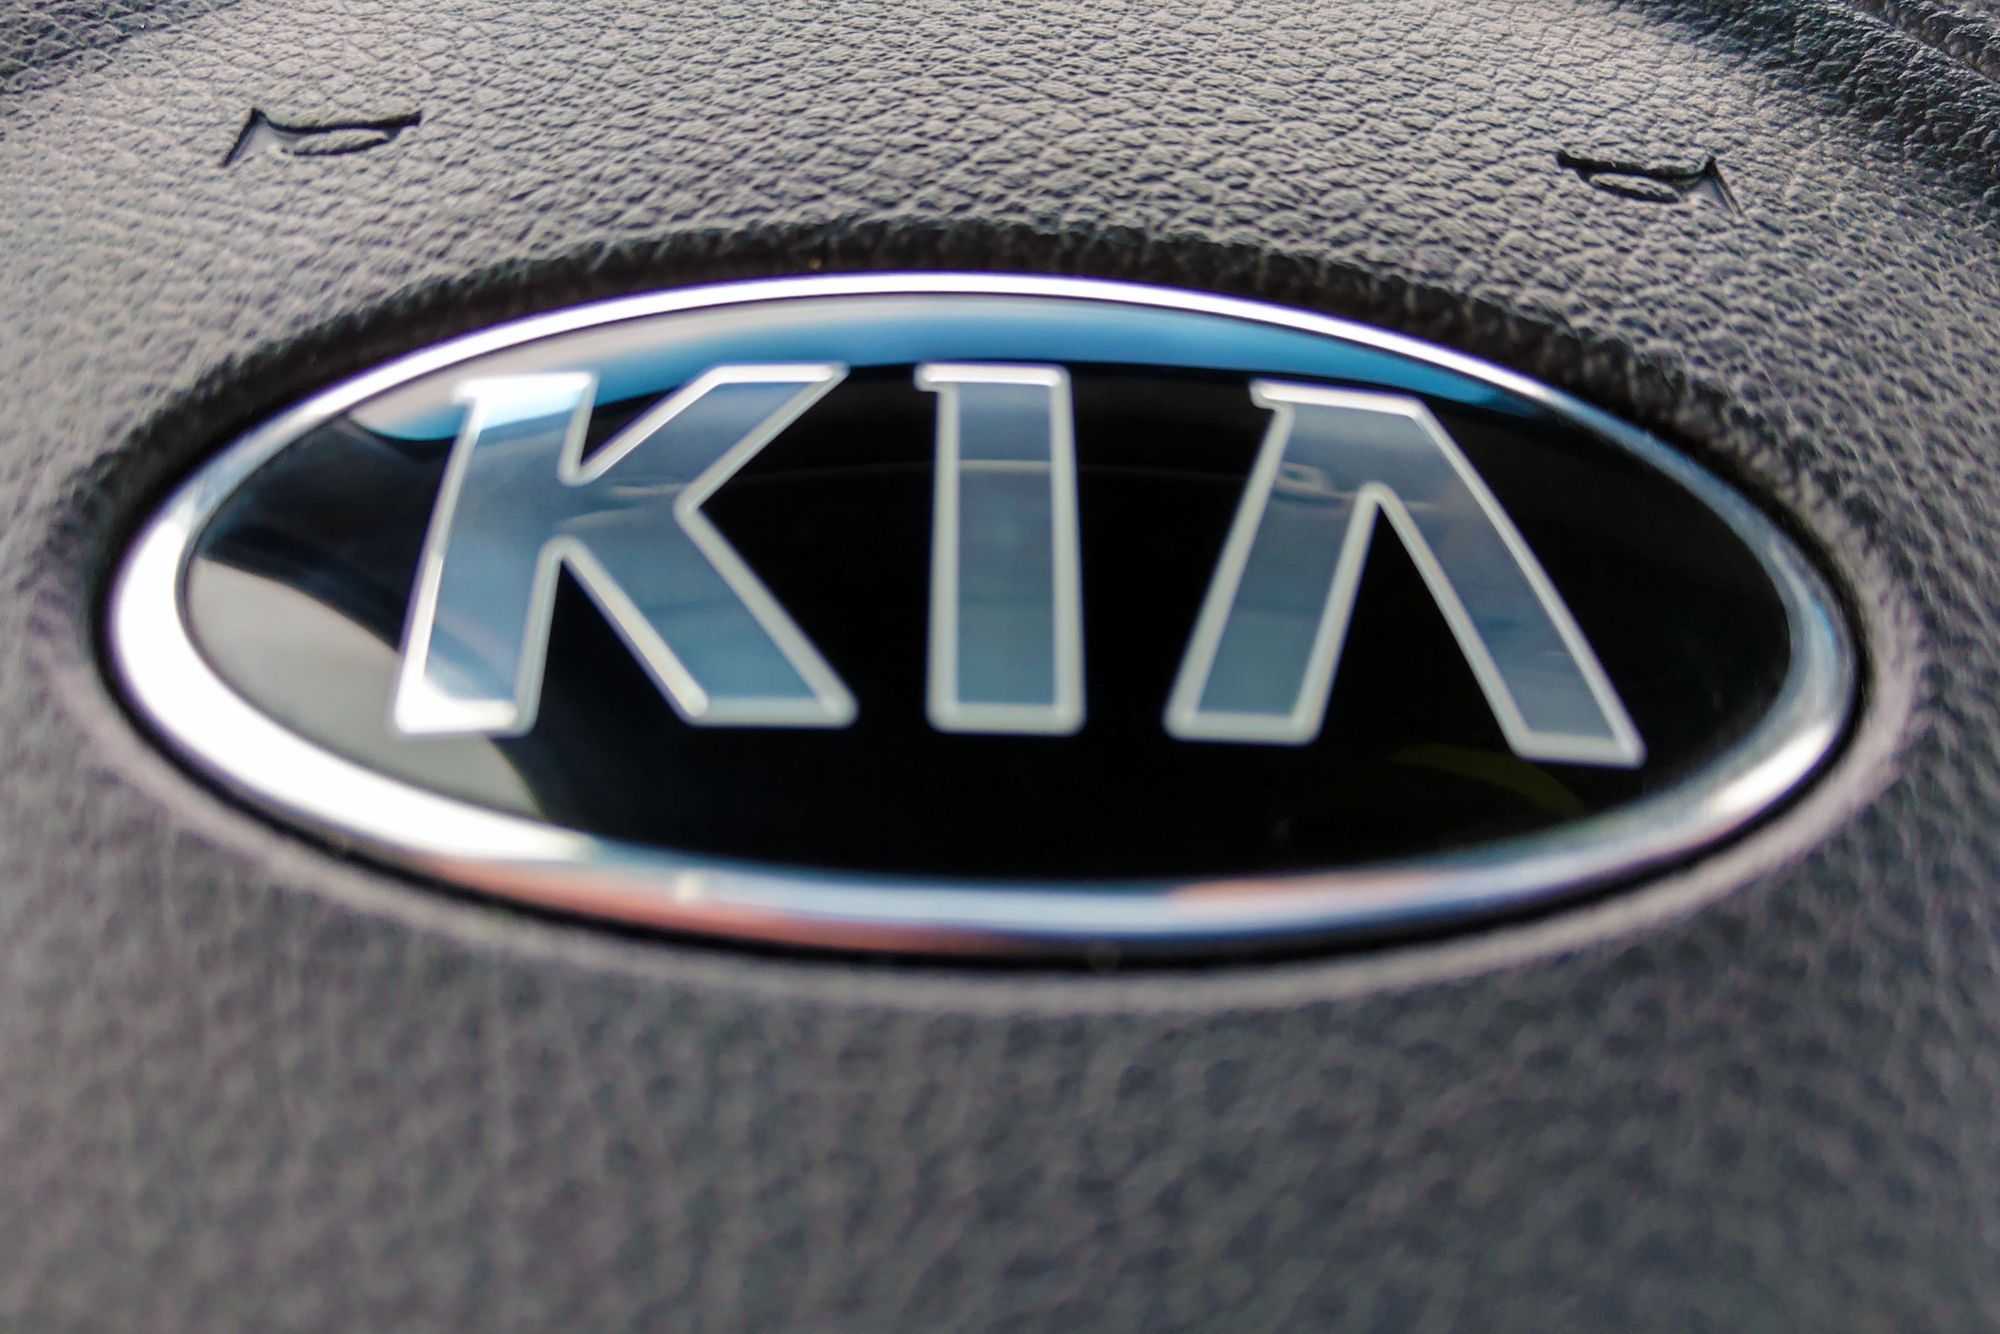 Fire Risk Sparks Another Kia Recall of 380K Vehicles - Top Class Actions